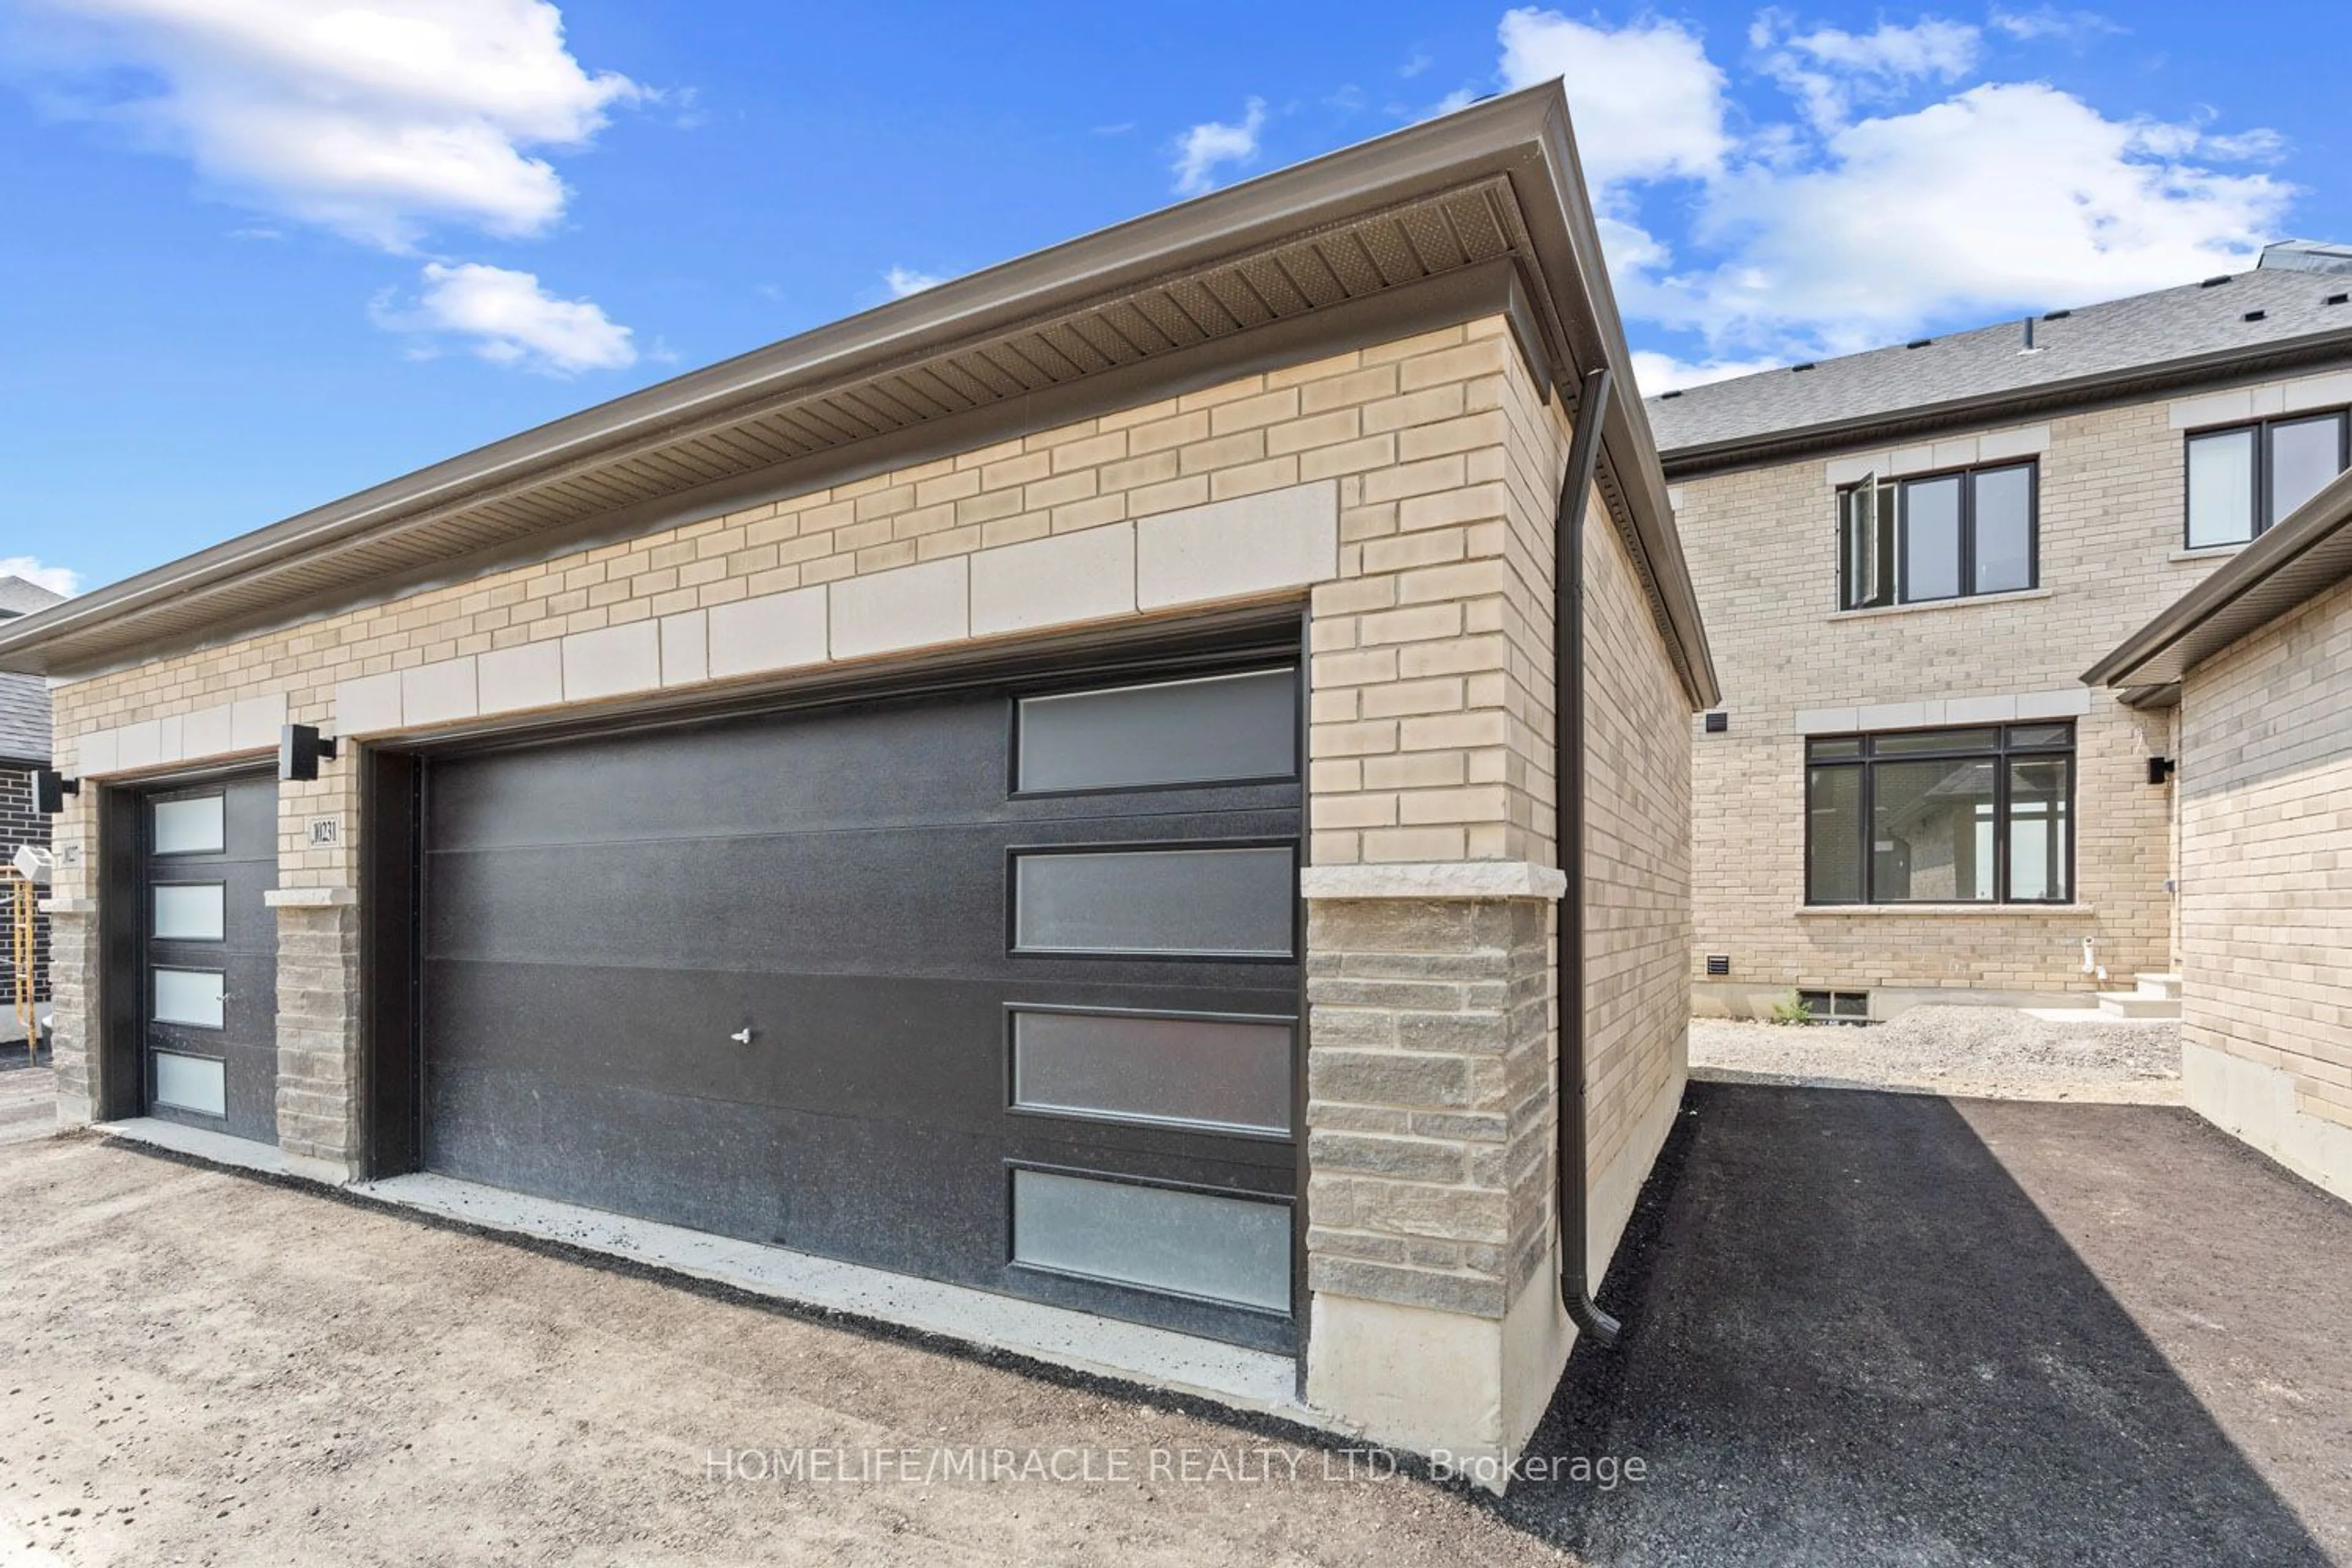 Home with brick exterior material for 10231 Huntington Rd, Vaughan Ontario L0J 1C0